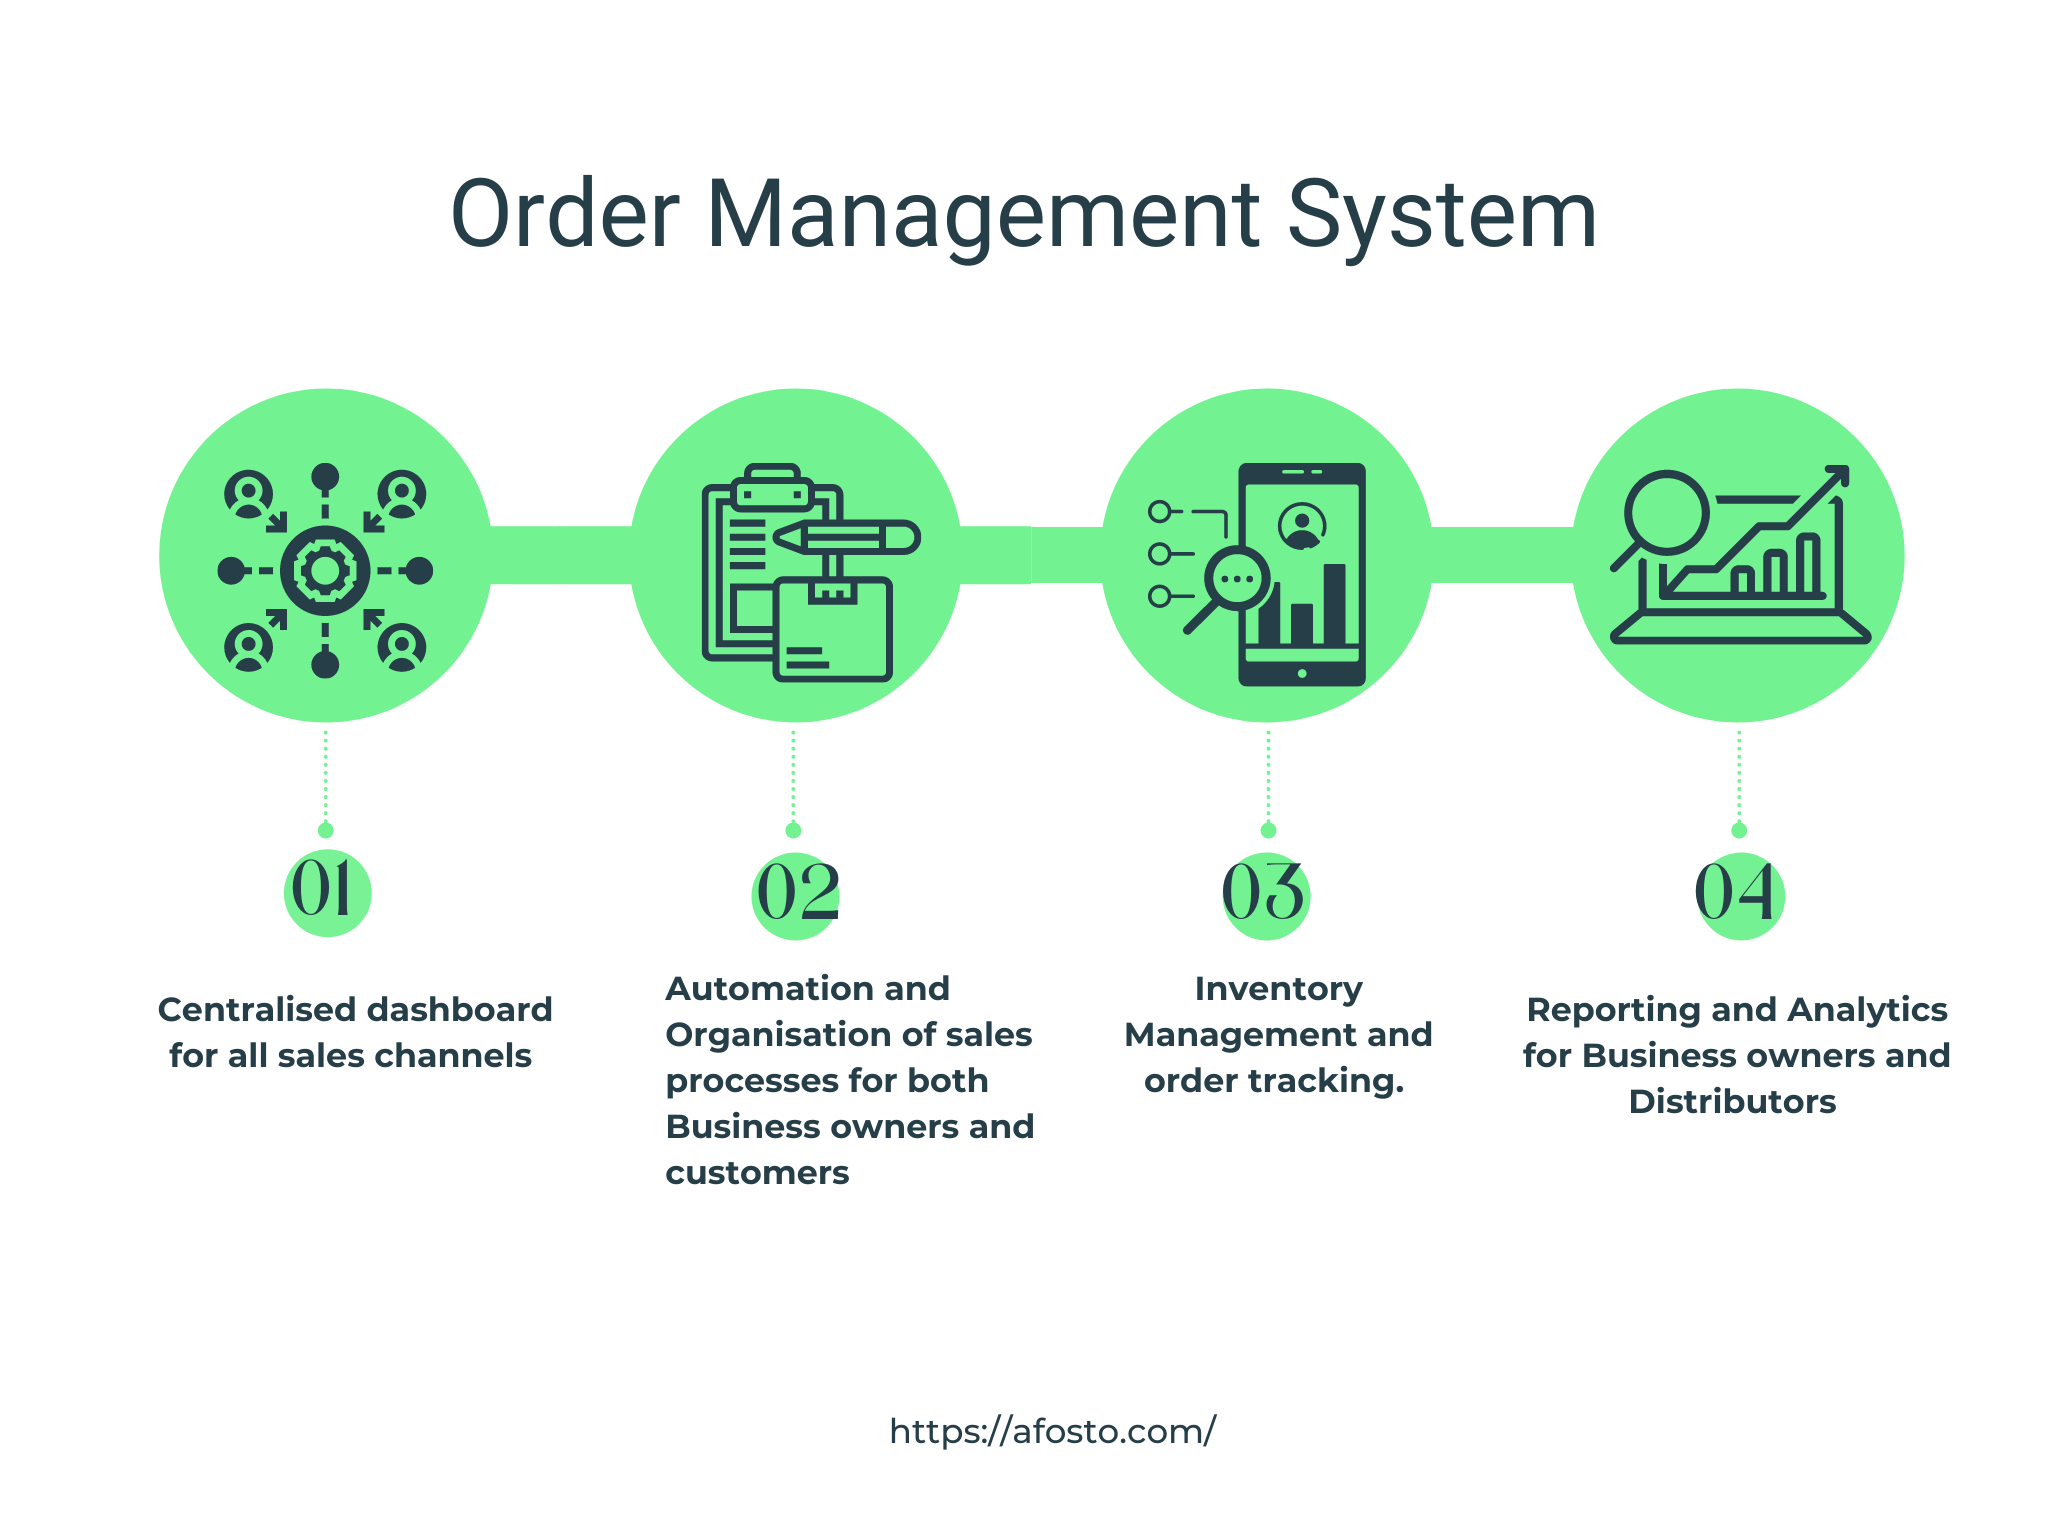 What is an Order Management System?